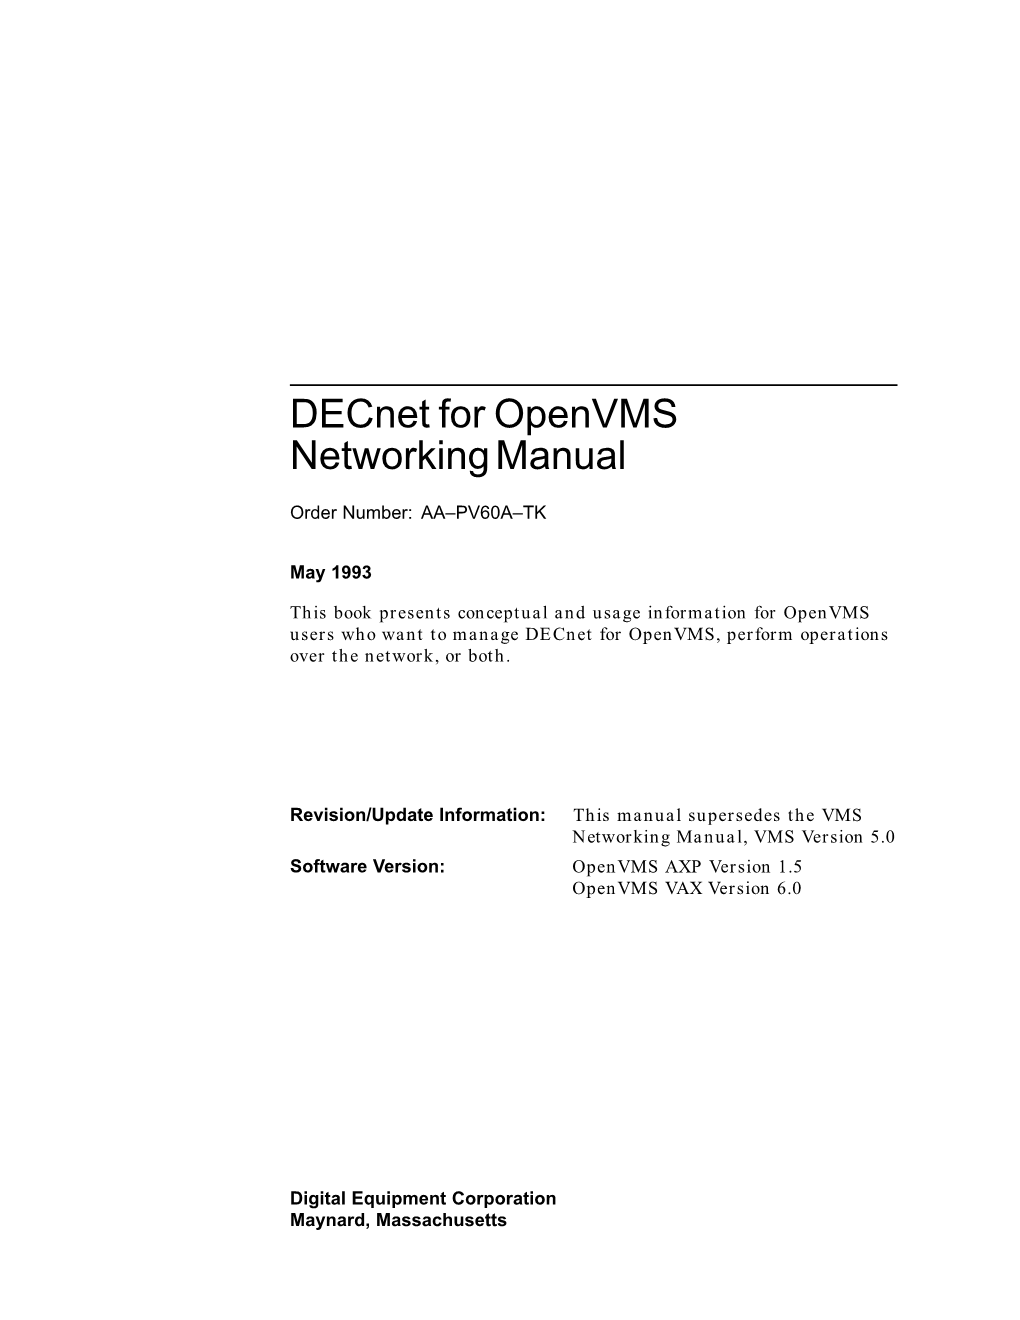 Decnet for Openvms Networking Manual